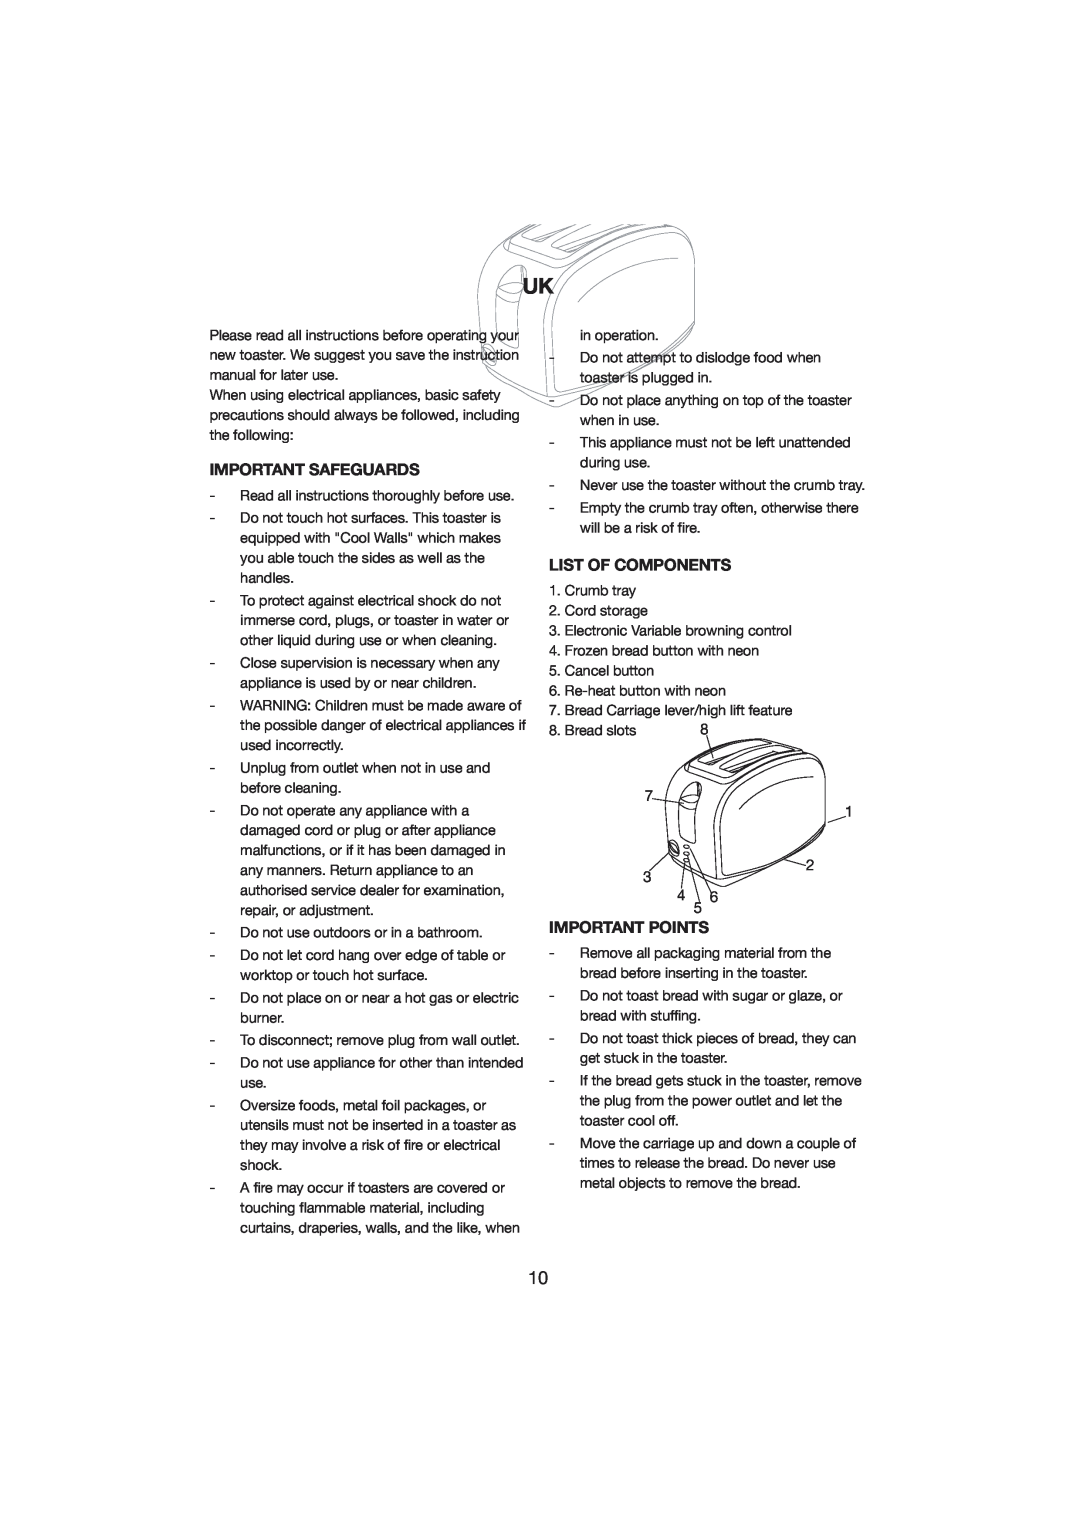 Melissa 243-001 manual Important Safeguards, List Of Components, Important Points 